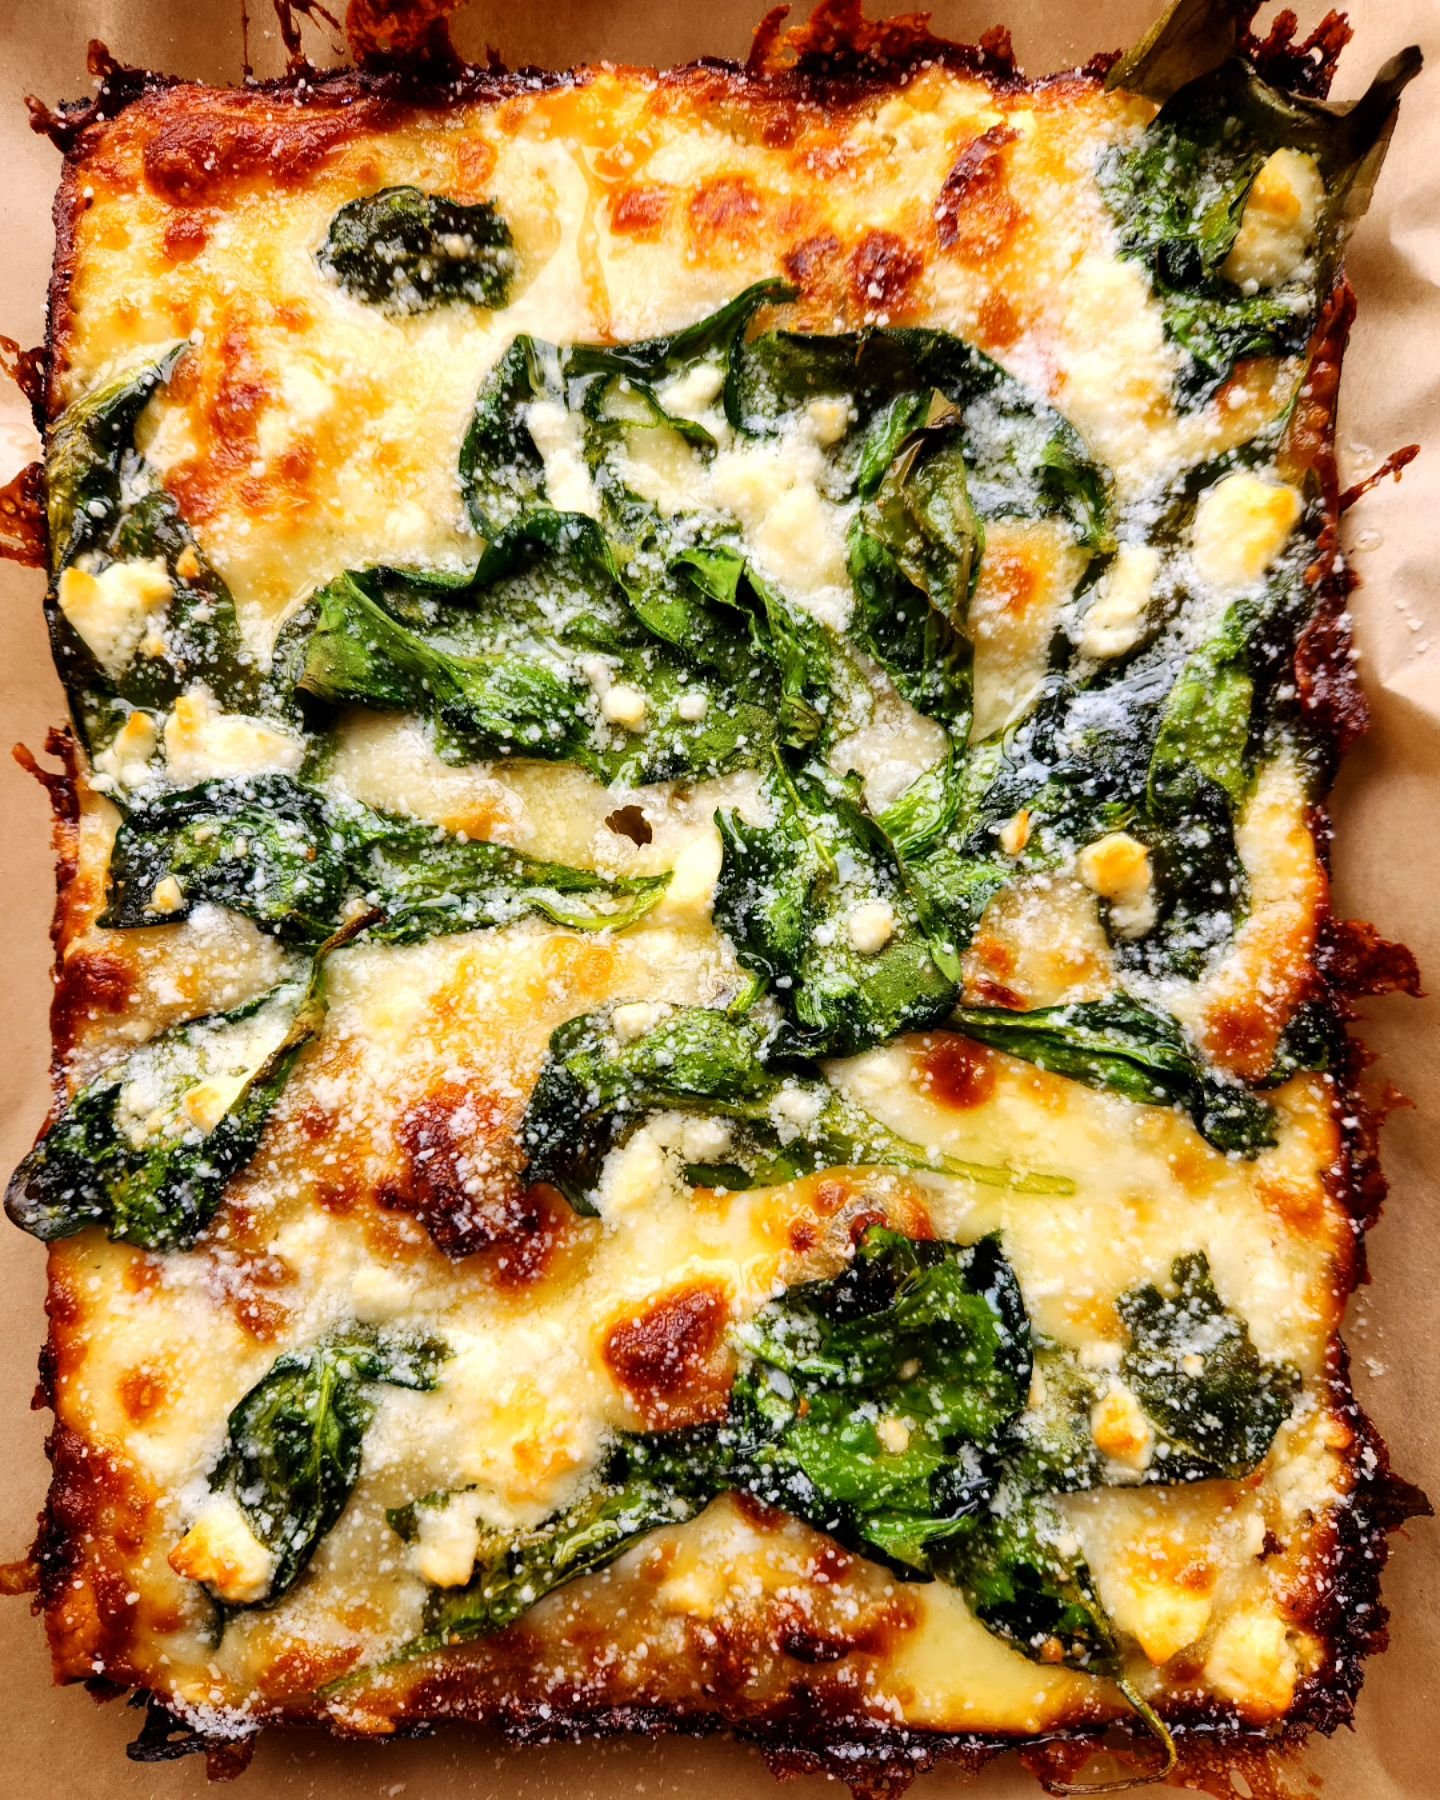 It's Wednesday.  Our Wednesday special is still going strong. $15.00 large pepperoni/cheese today. 

Milly bread special this week: @ghosthouse.farm spinach, feta and garlic cream sauce

Sorbet: lemon + black lime. 

New feature tomorrow.  See you so